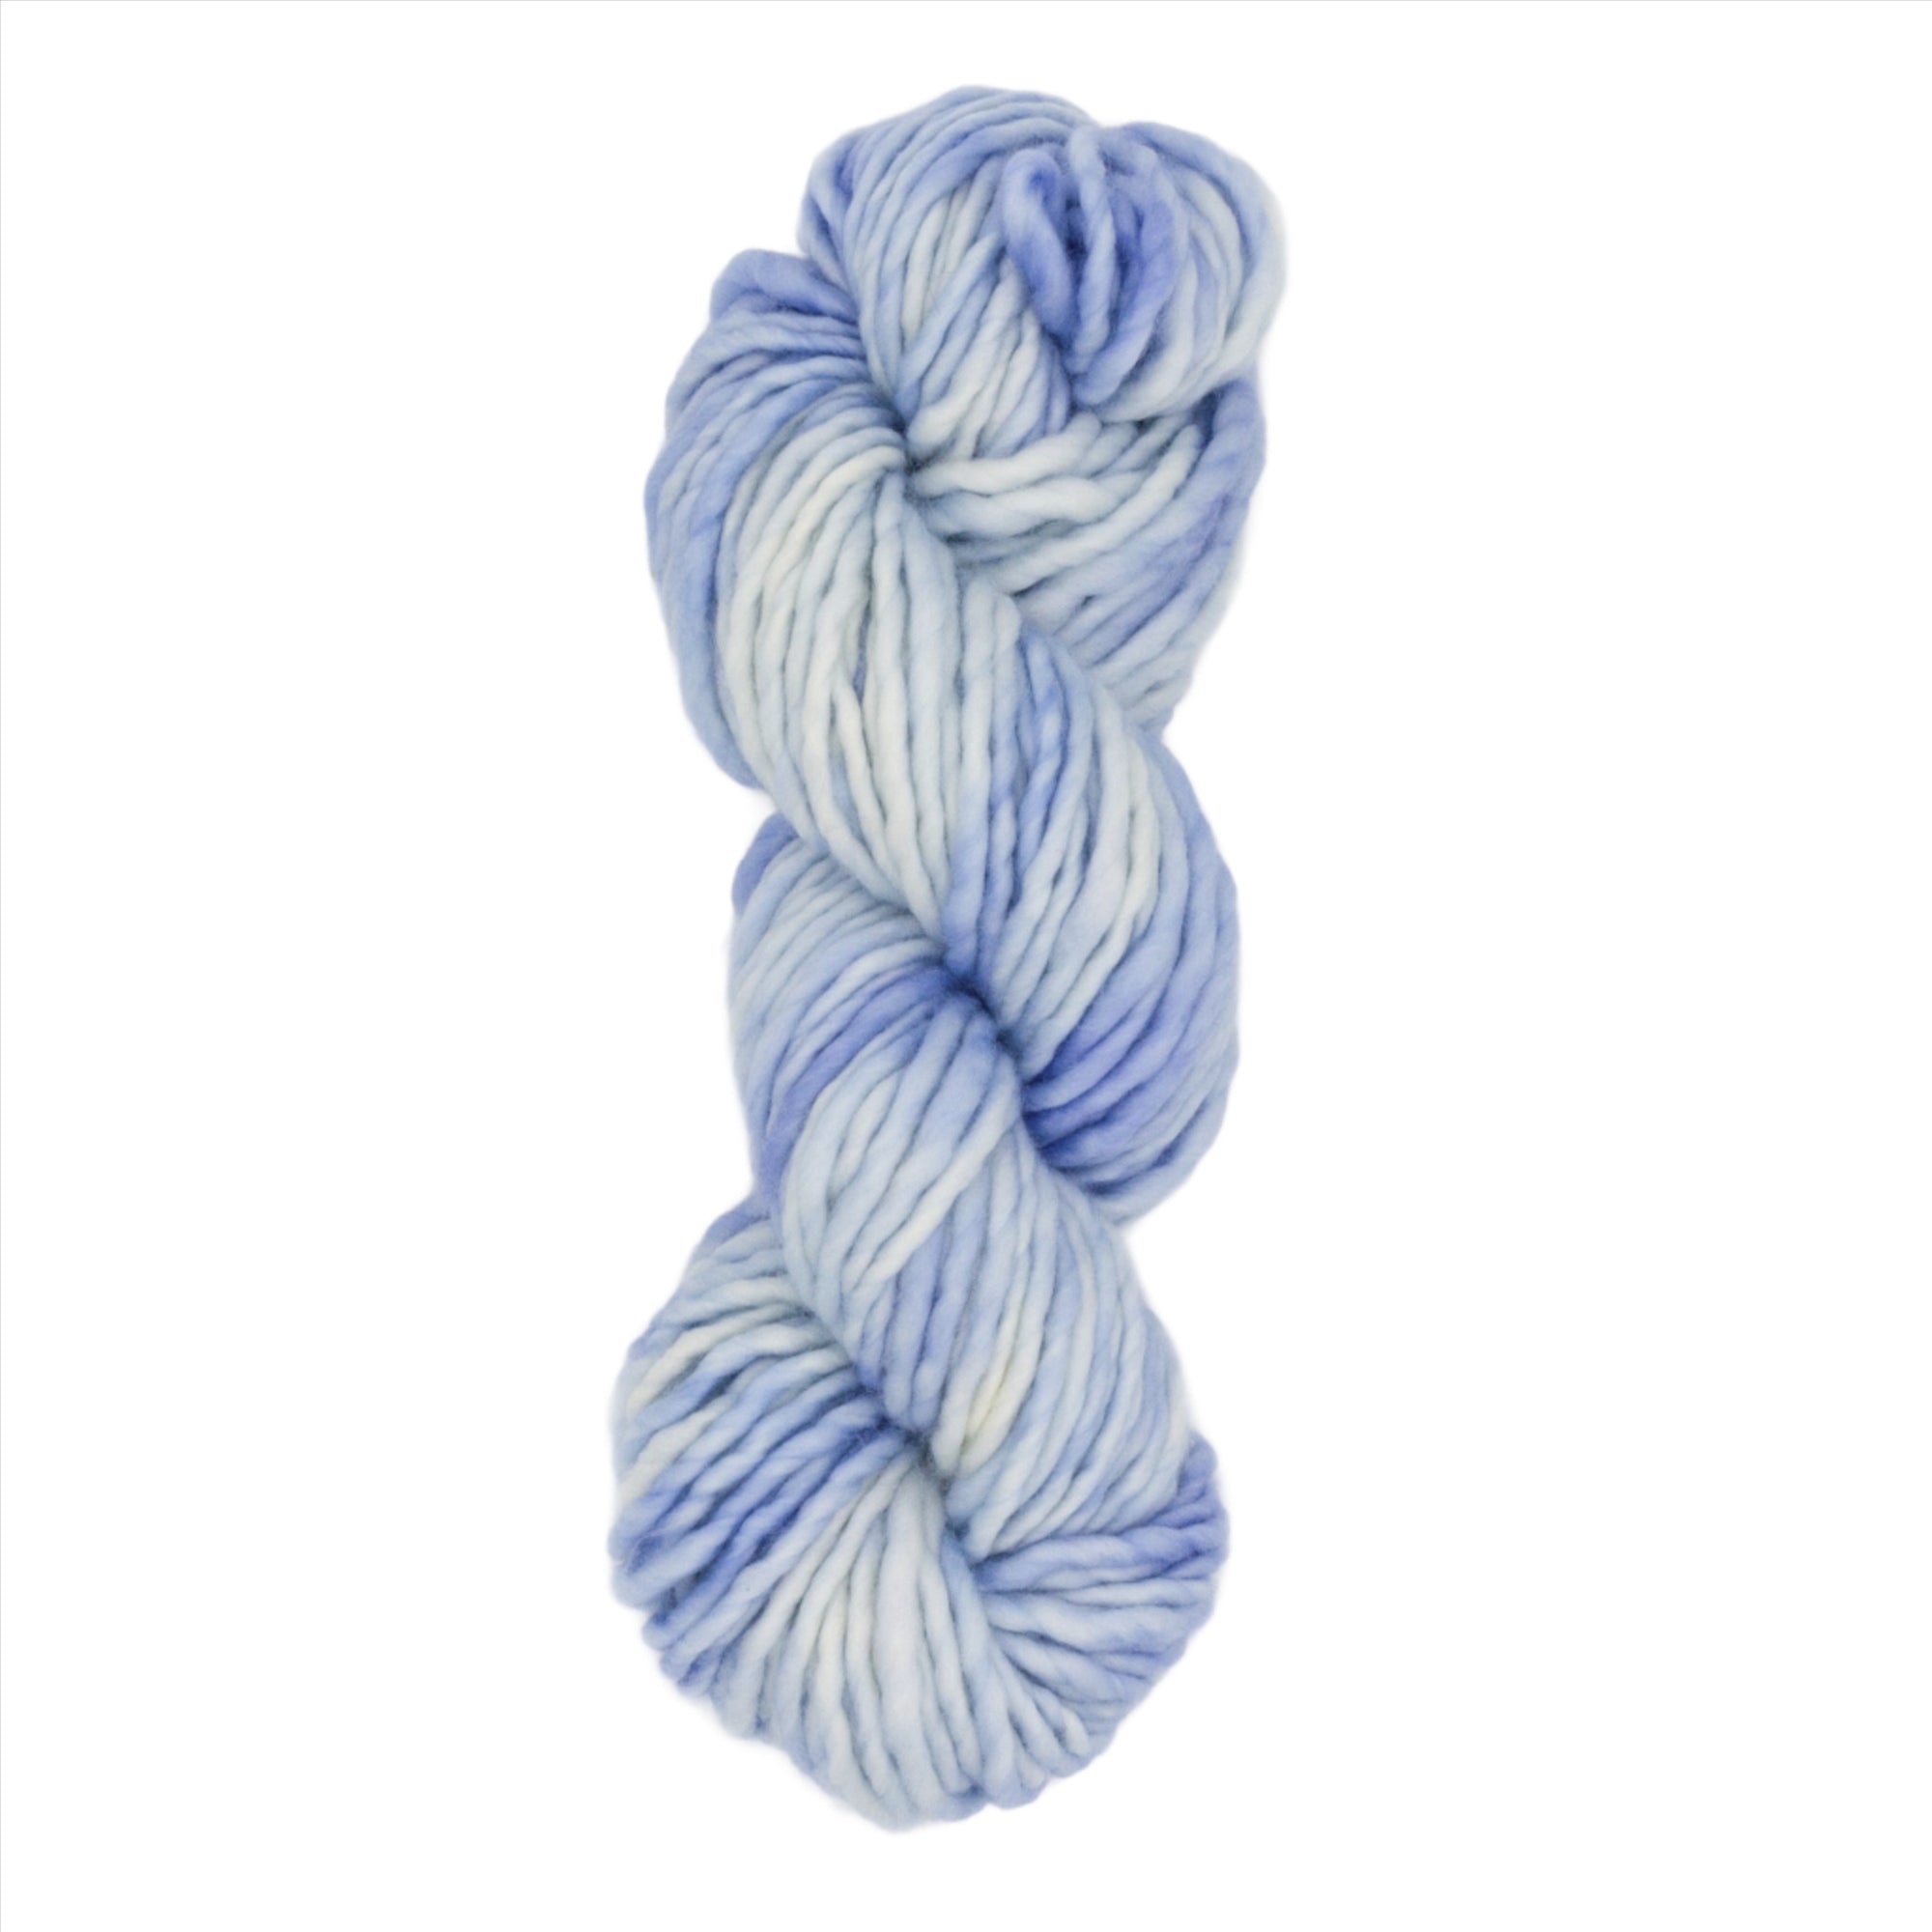 Loopy Signature Bulky (Clouds) - 1 ply Superwash Merino